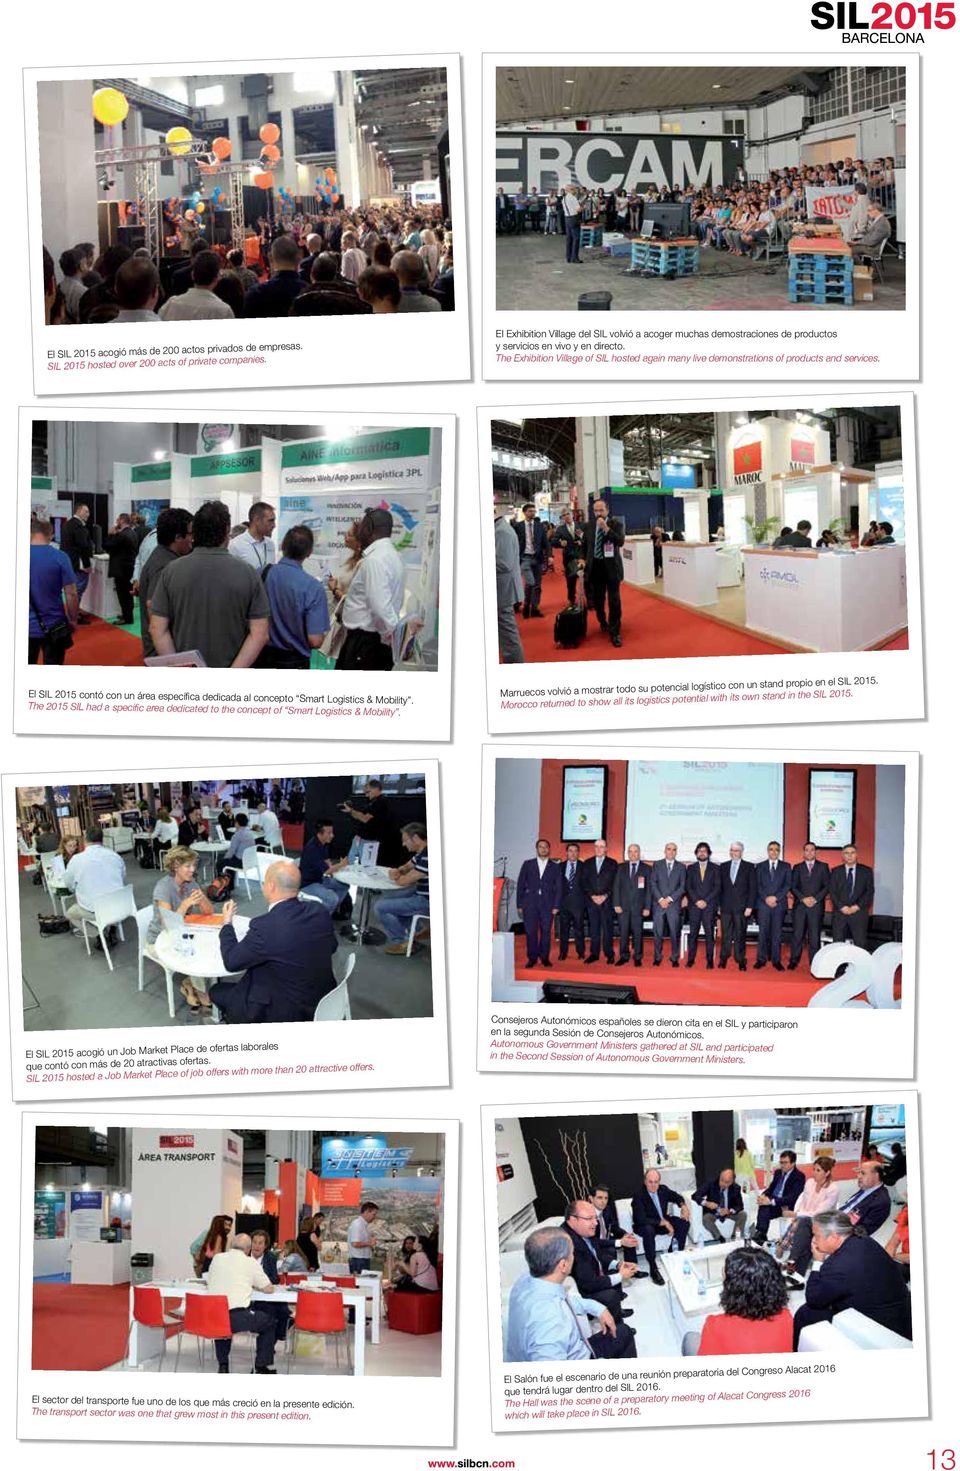 The Exhibition Village of SIL hosted again many live demonstrations of products and services. El SIL 2015 contó con un área específica dedicada al concepto Smart Logistics & Mobility.